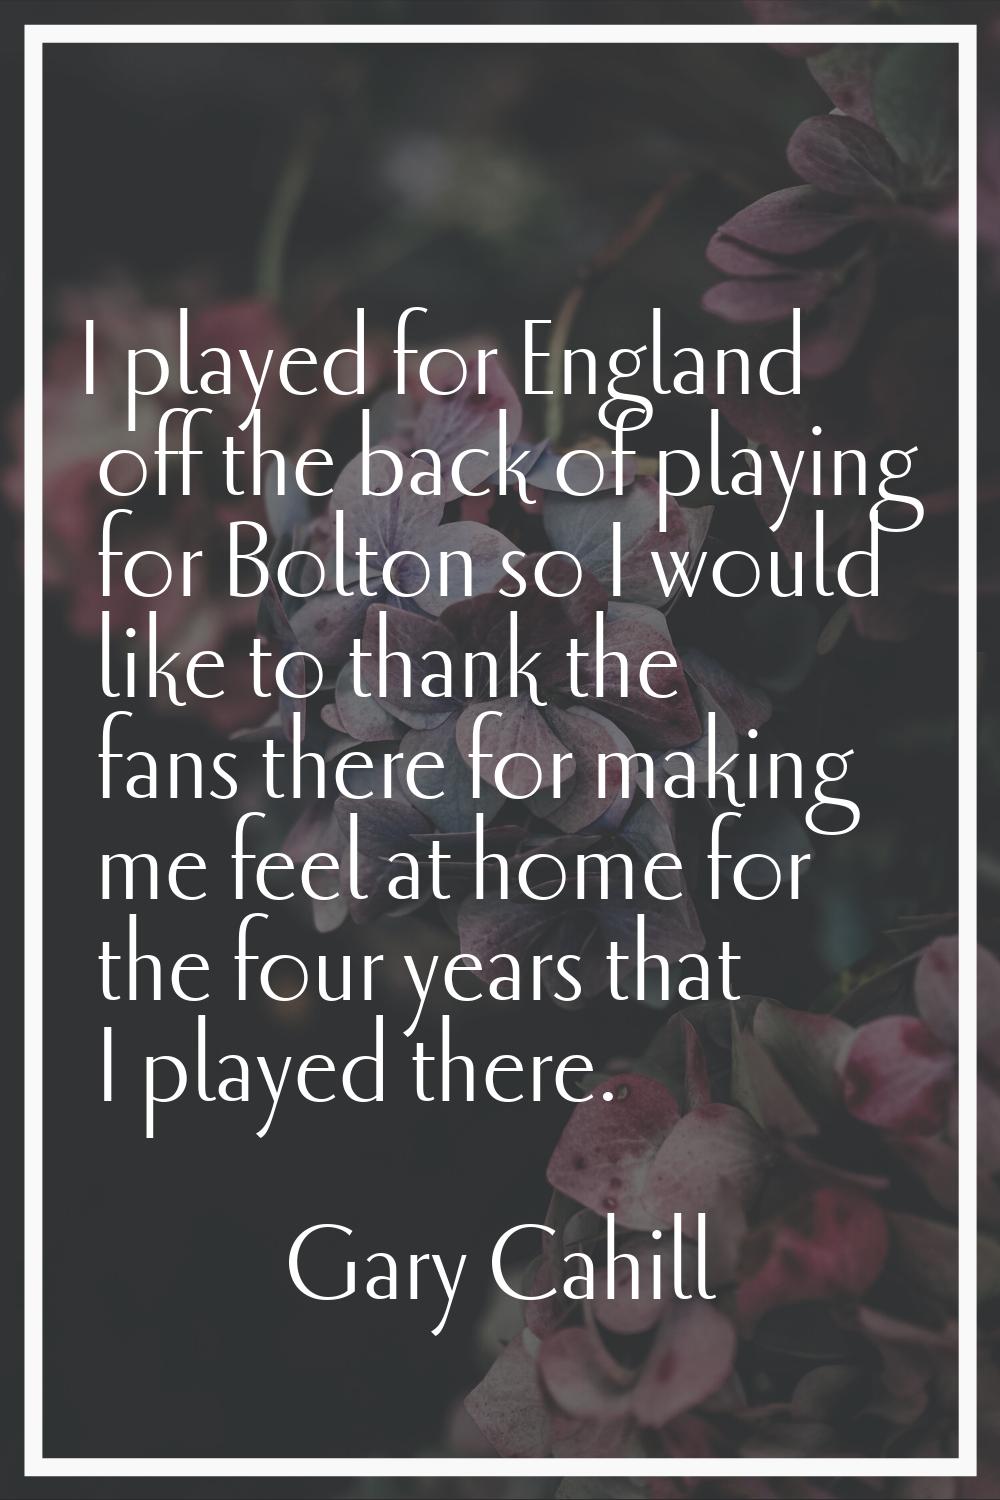 I played for England off the back of playing for Bolton so I would like to thank the fans there for